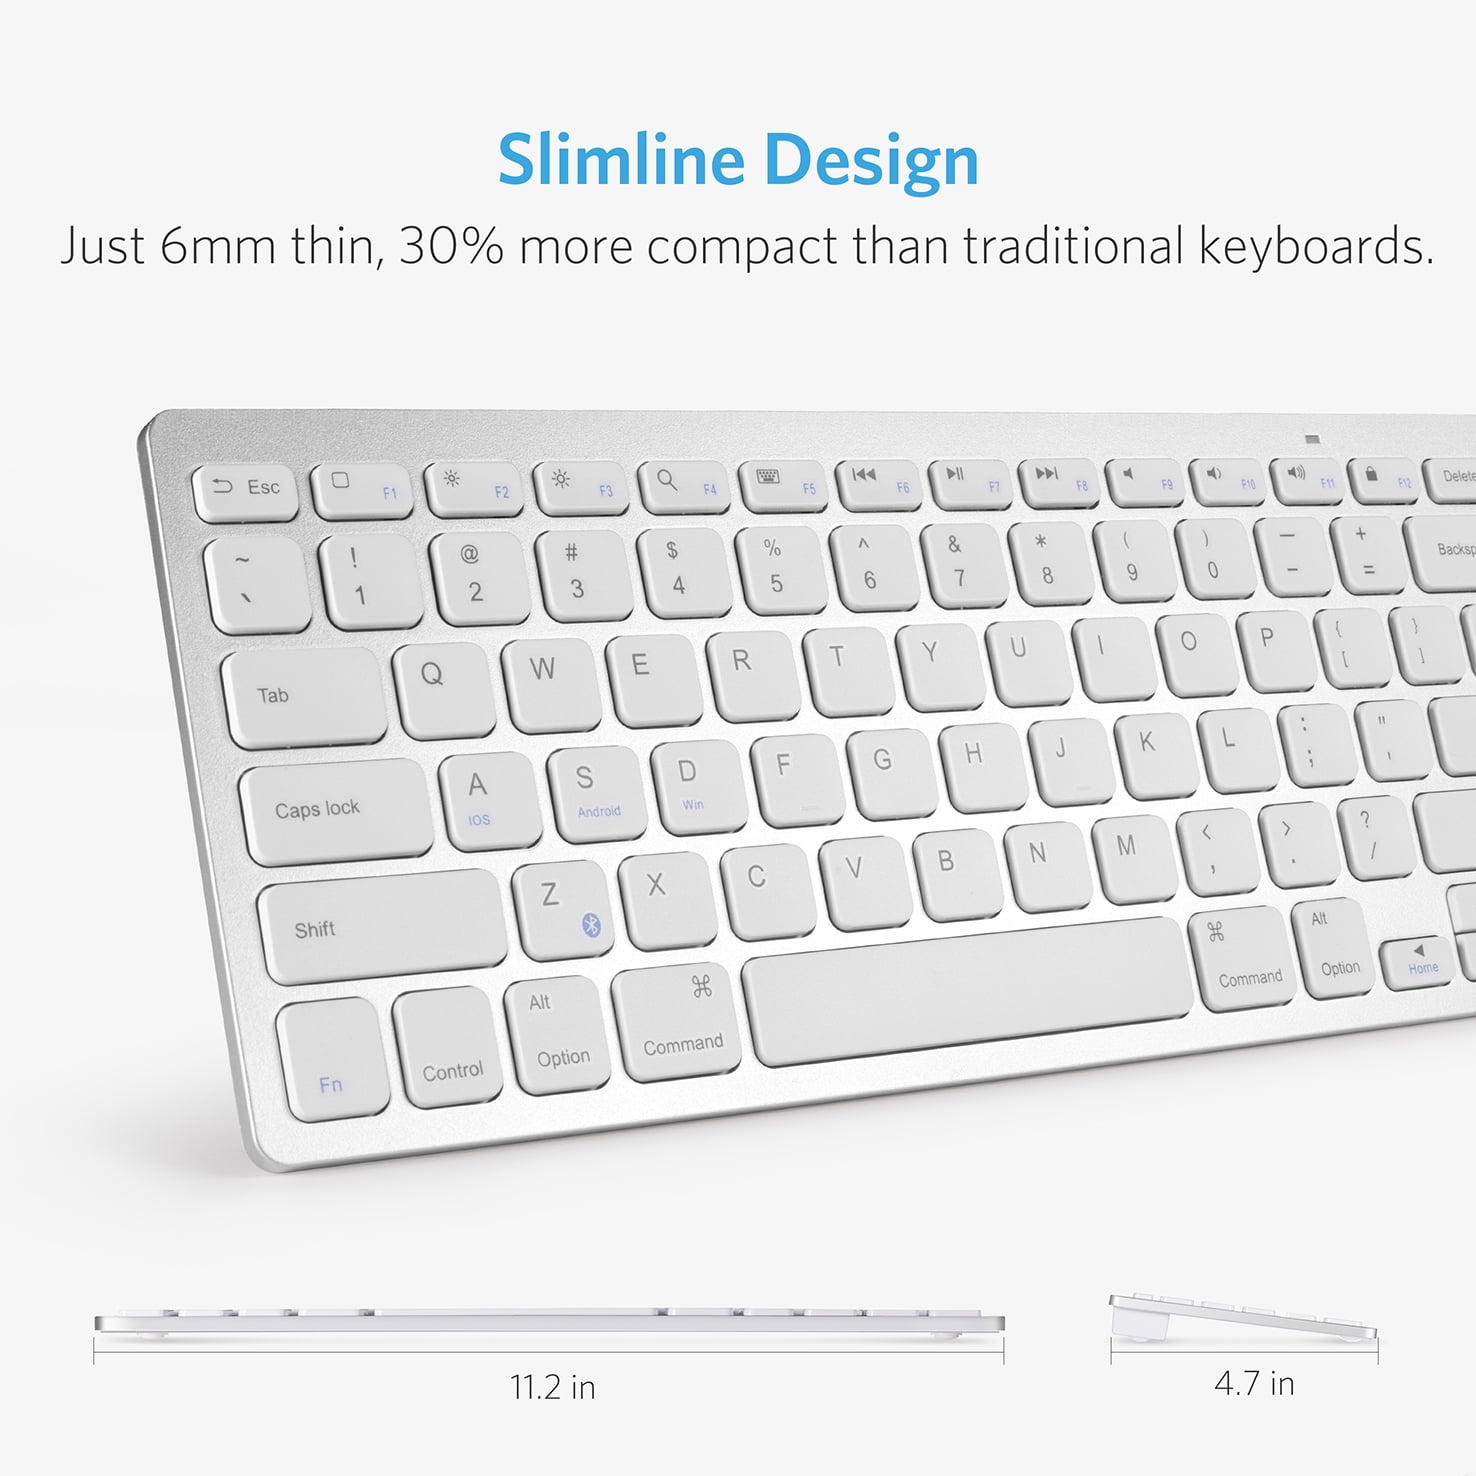 knap peregrination sprede Anker Ultra Compact Slim Profile Wireless Bluetooth Keyboard for iOS,  Android, Windows and Mac - Walmart.com